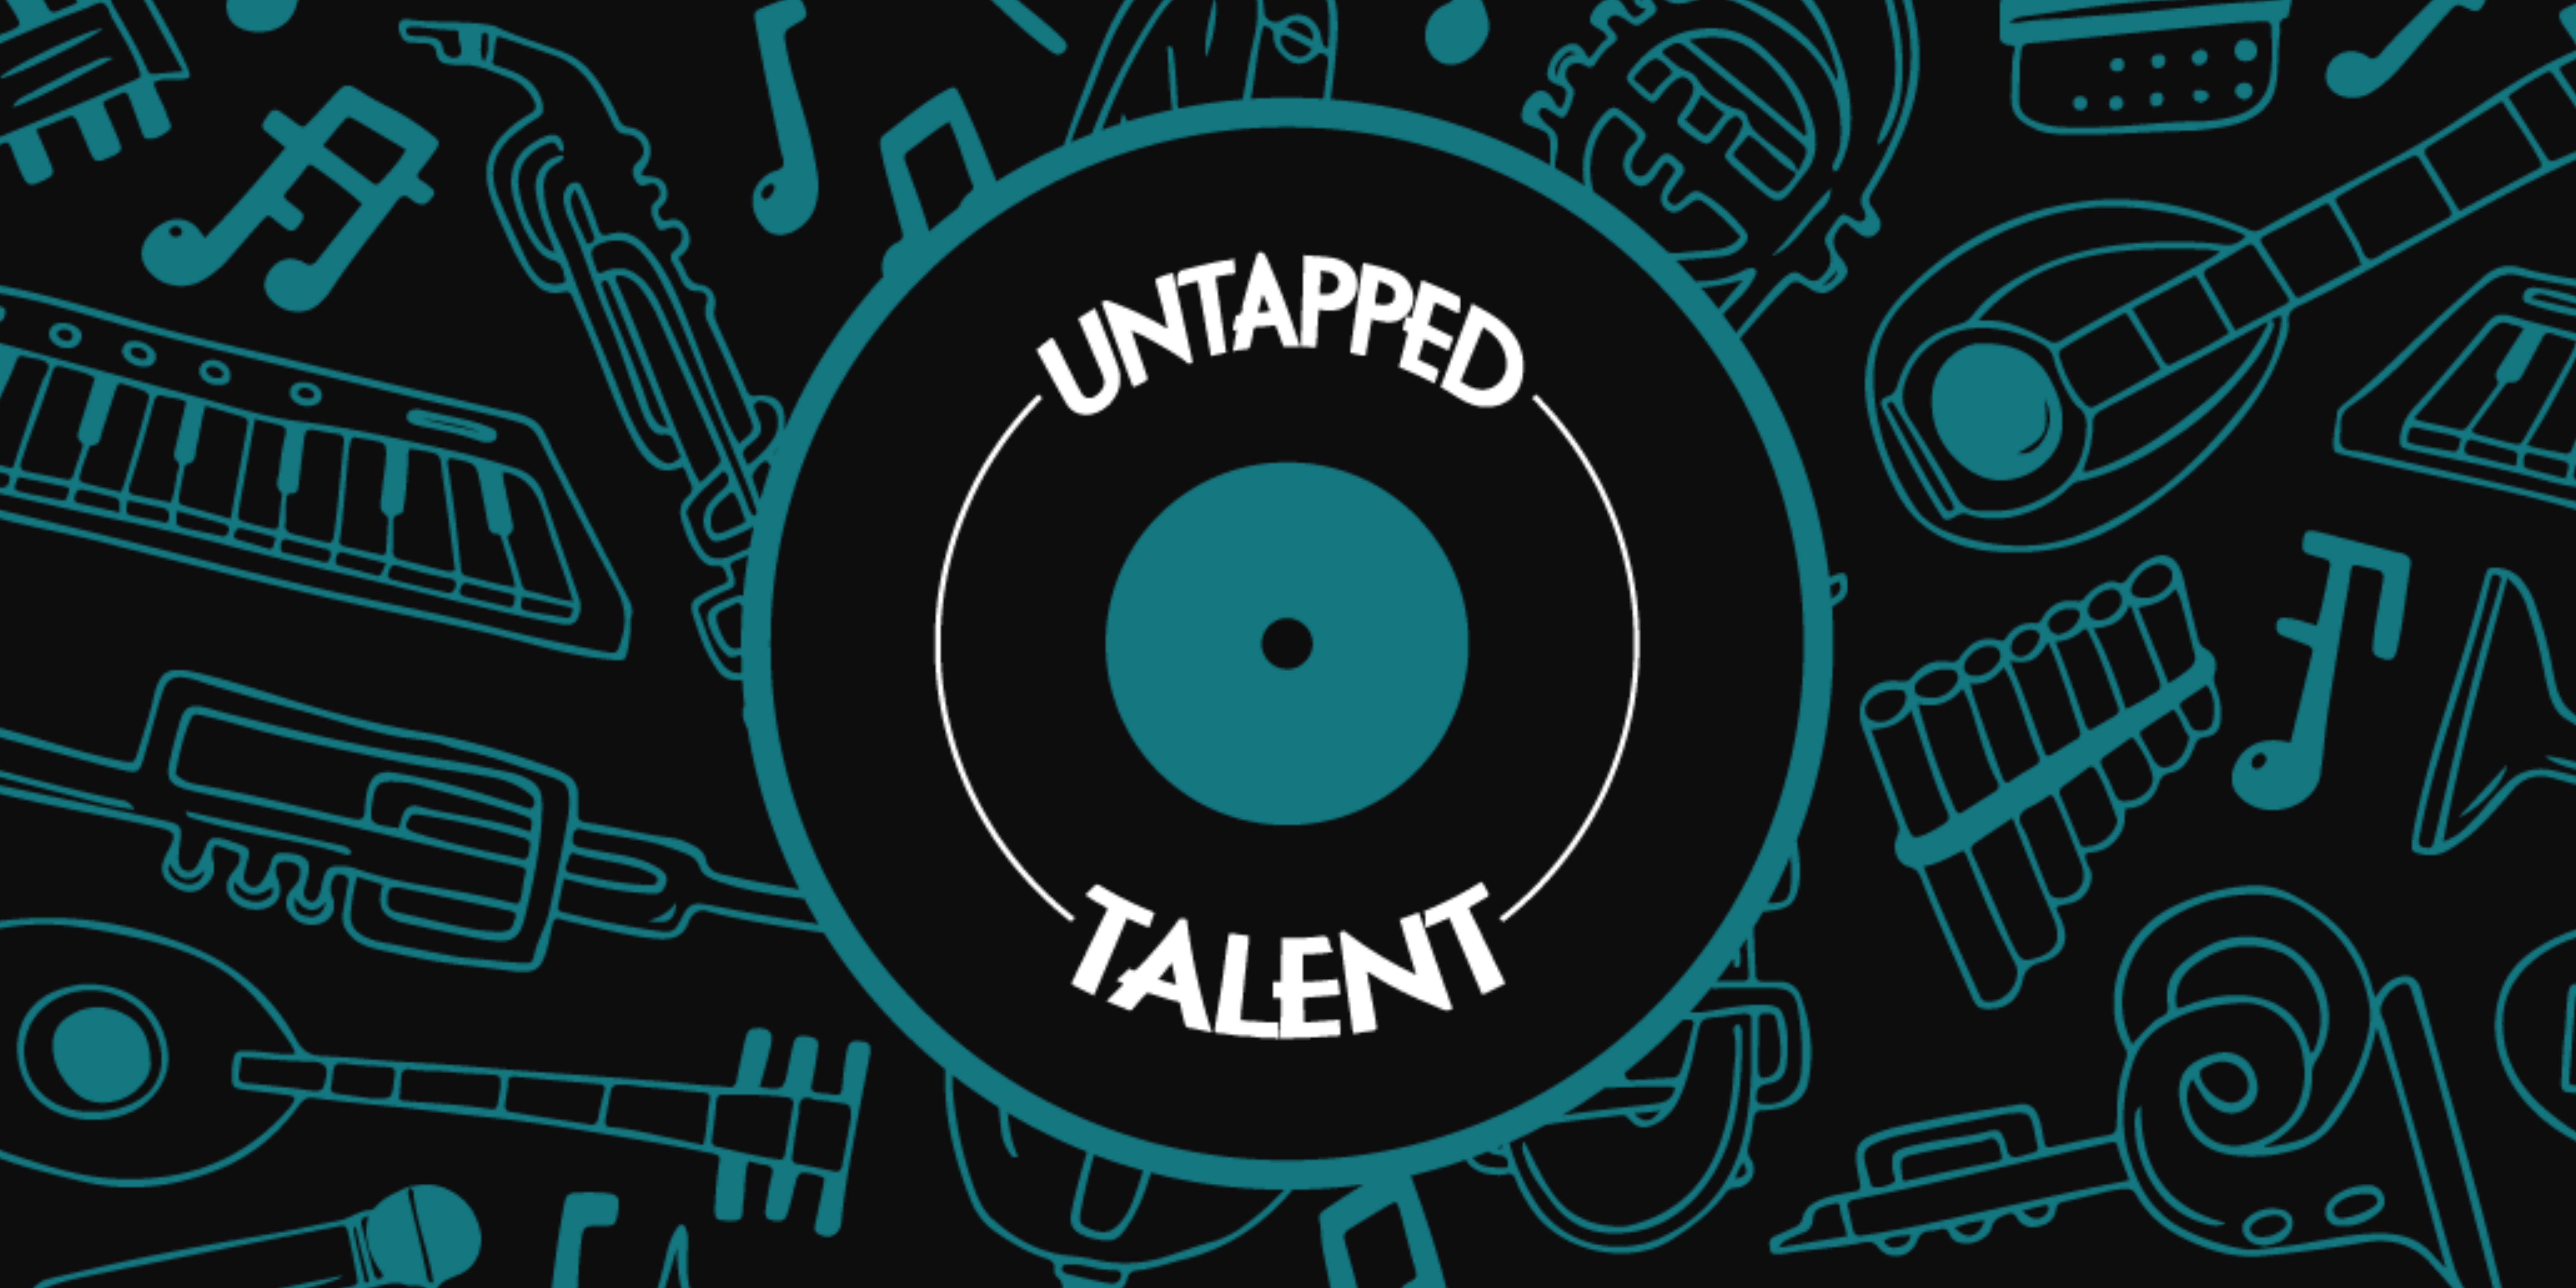 Untapped Talent